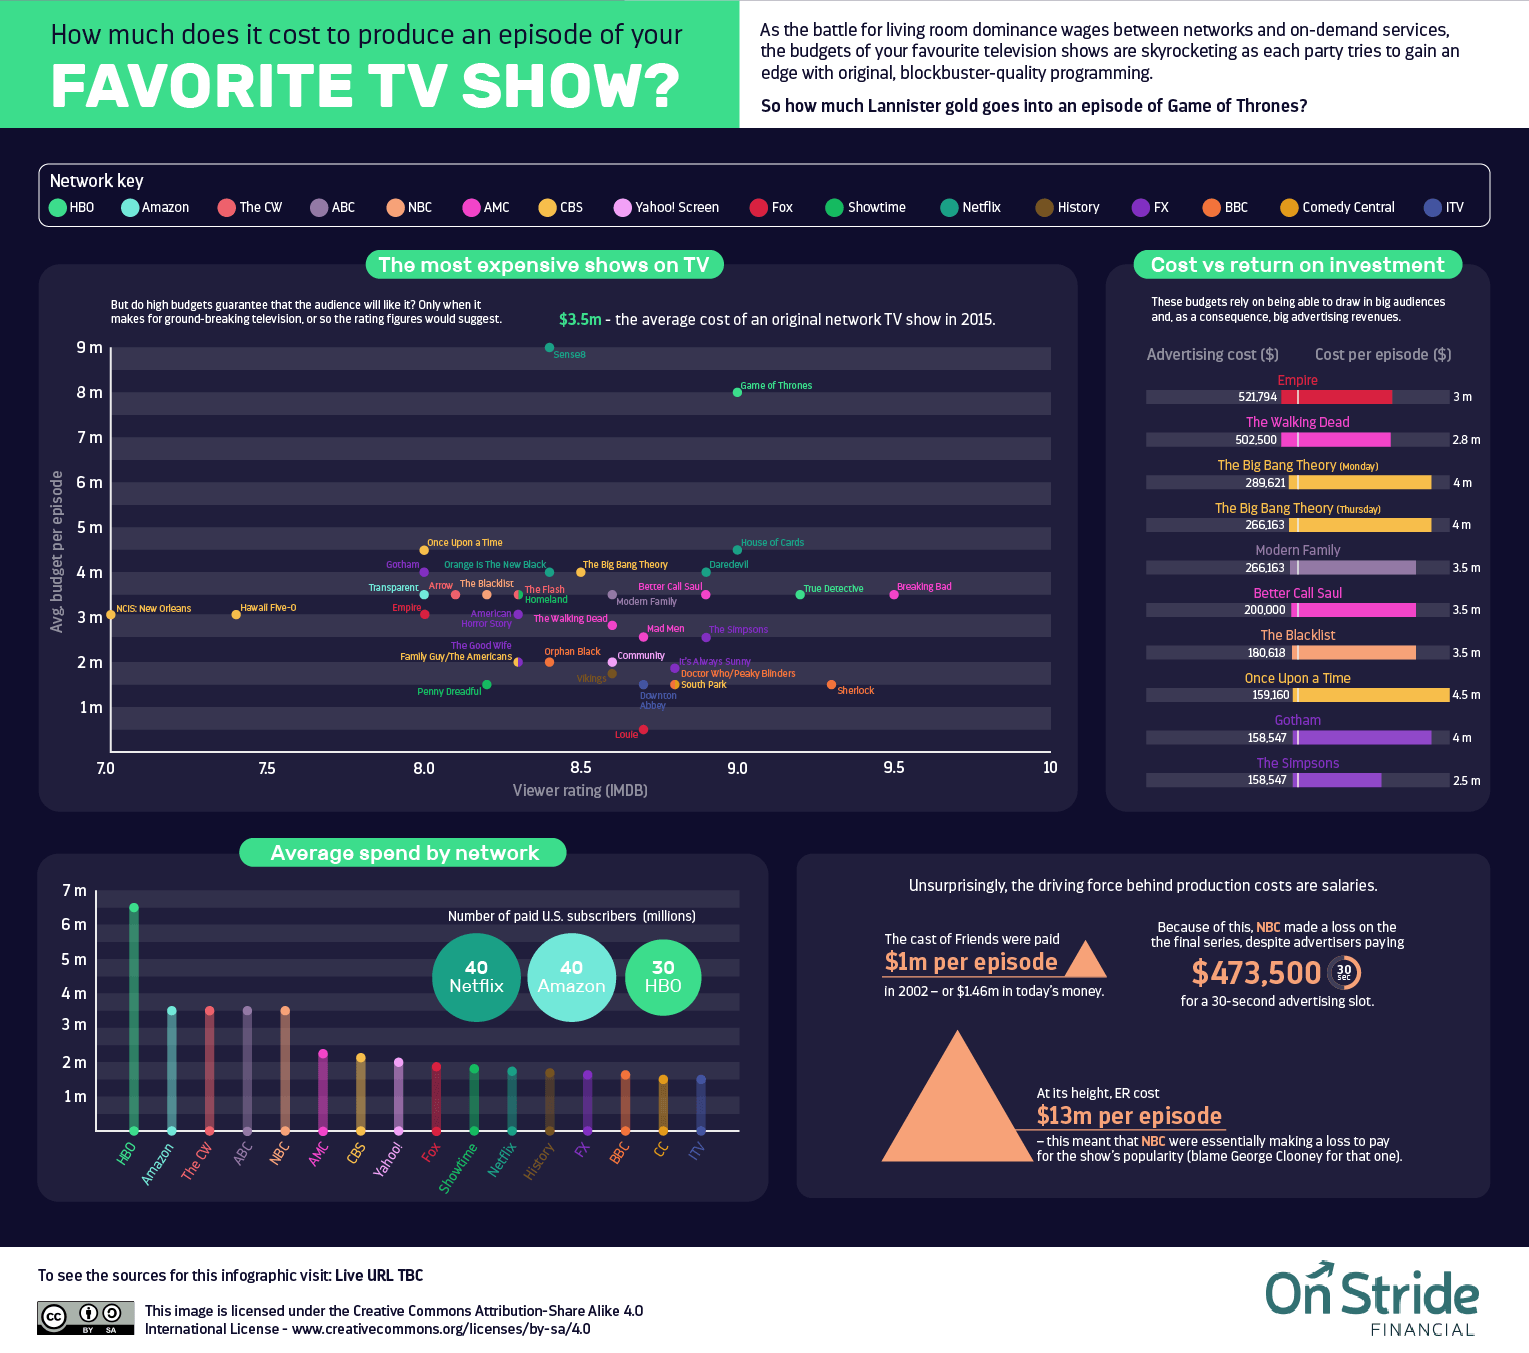 Cost of your favourite TV show